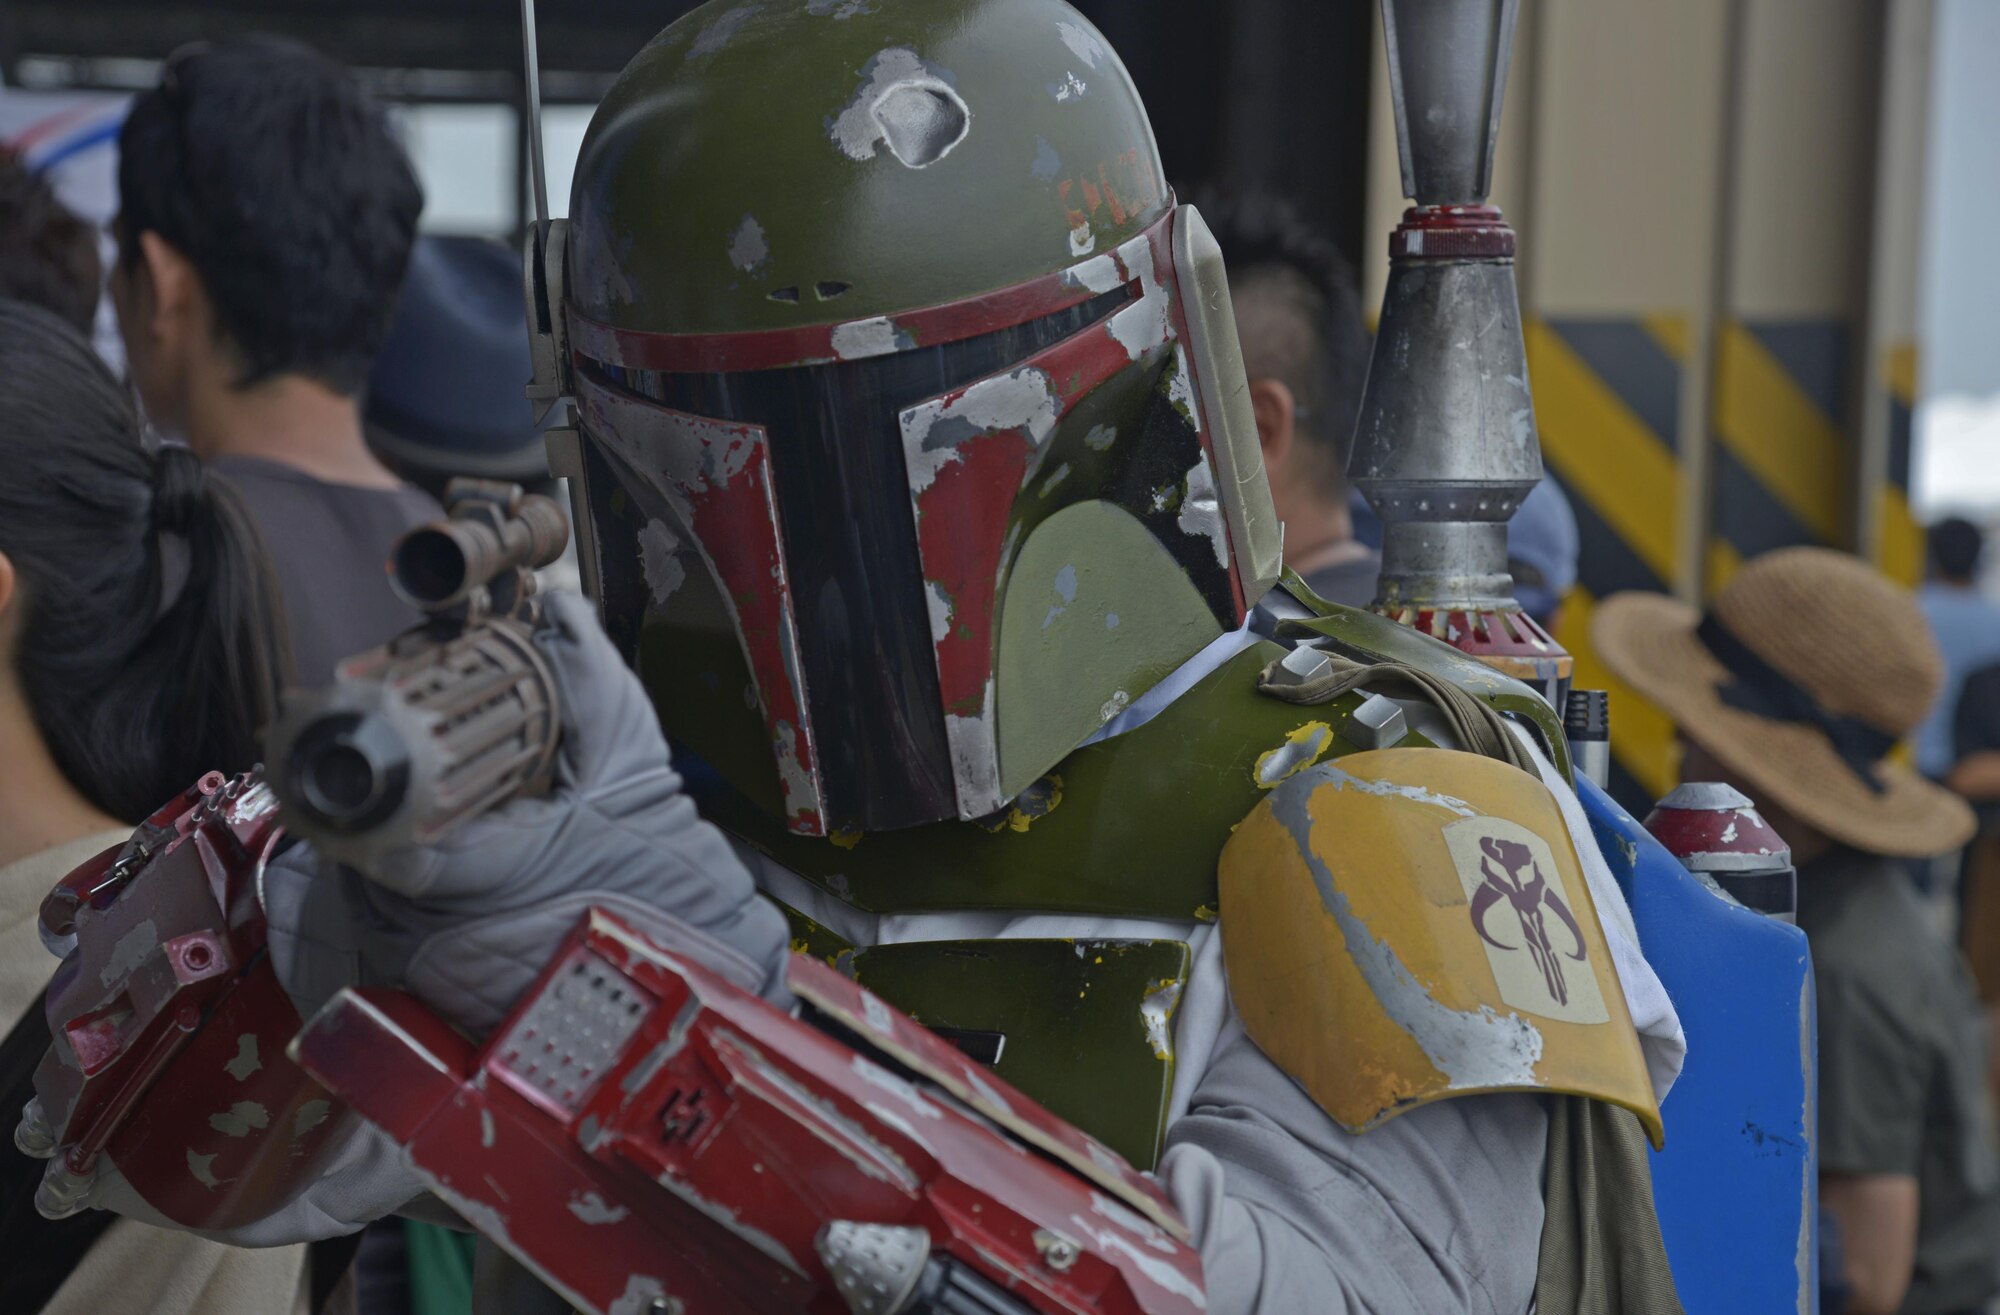 A person dressed as Boba Fett, a Star Wars movie character, poses for a picture during the Friendship Festival at Yokota Air Base, Japan, Sept. 17, 2016. The festival is designed to bolster the bilateral relationship shared between the United States and Japan. (U.S. Air Force photo by Senior Airman David Owsianka/Released)